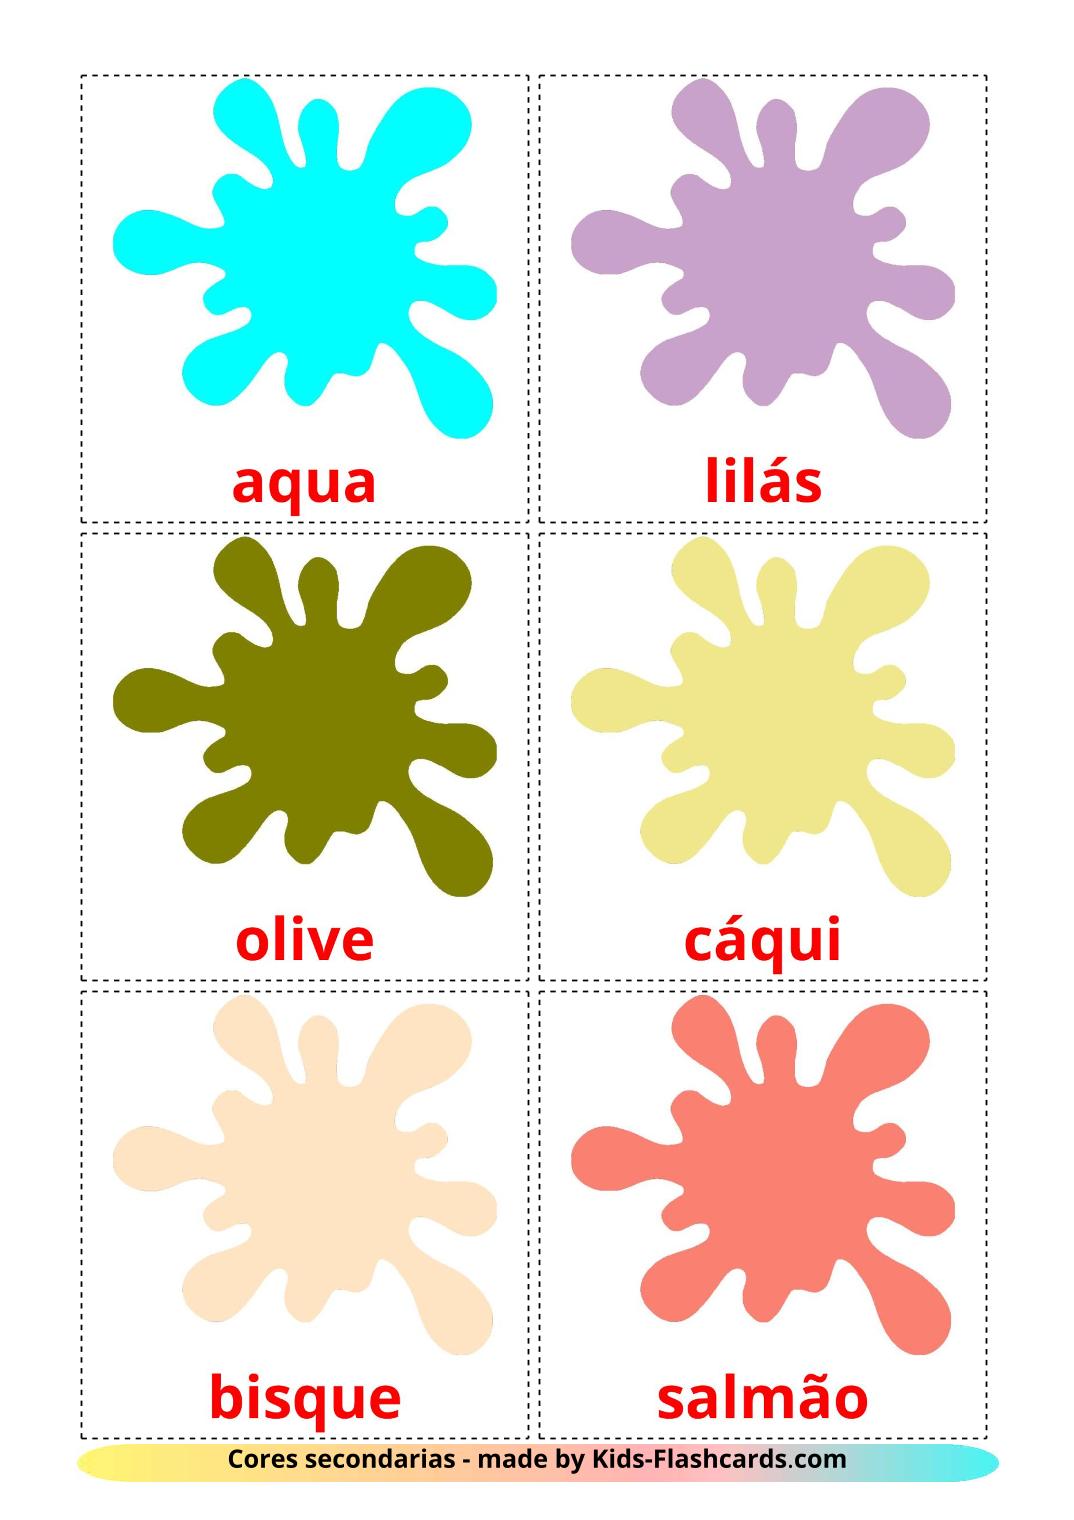 Secondary colors - 20 Free Printable portuguese Flashcards 